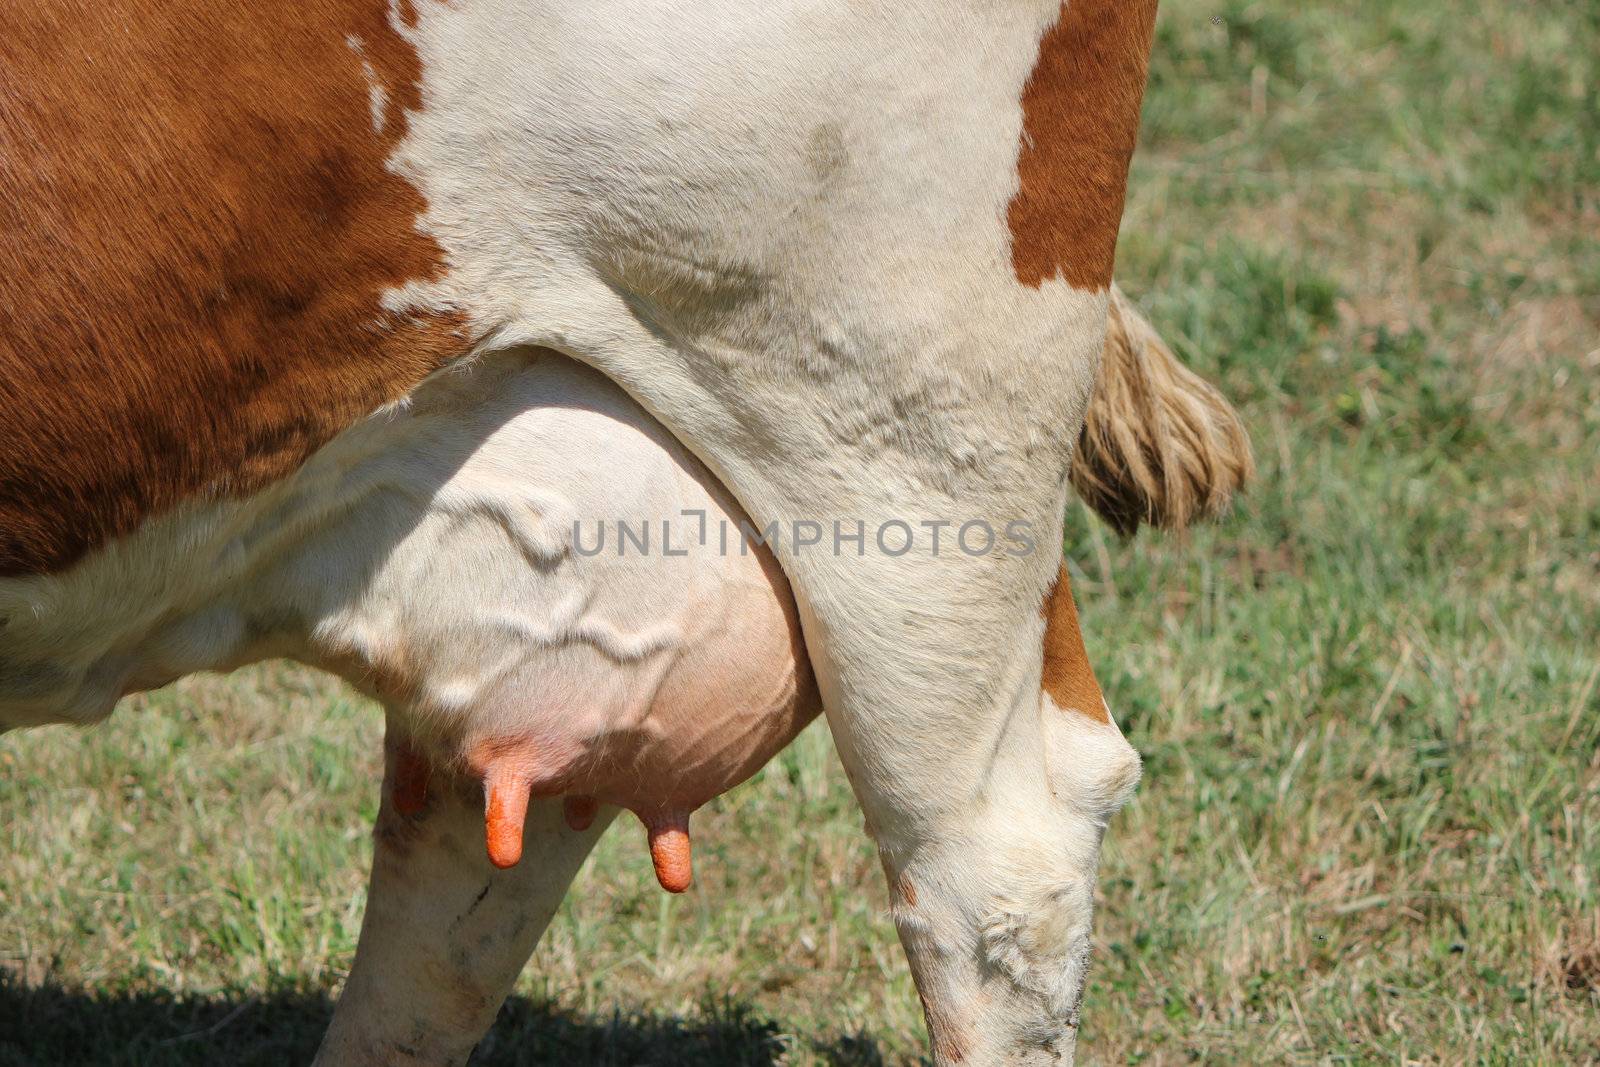 Udders of a brown and white cow